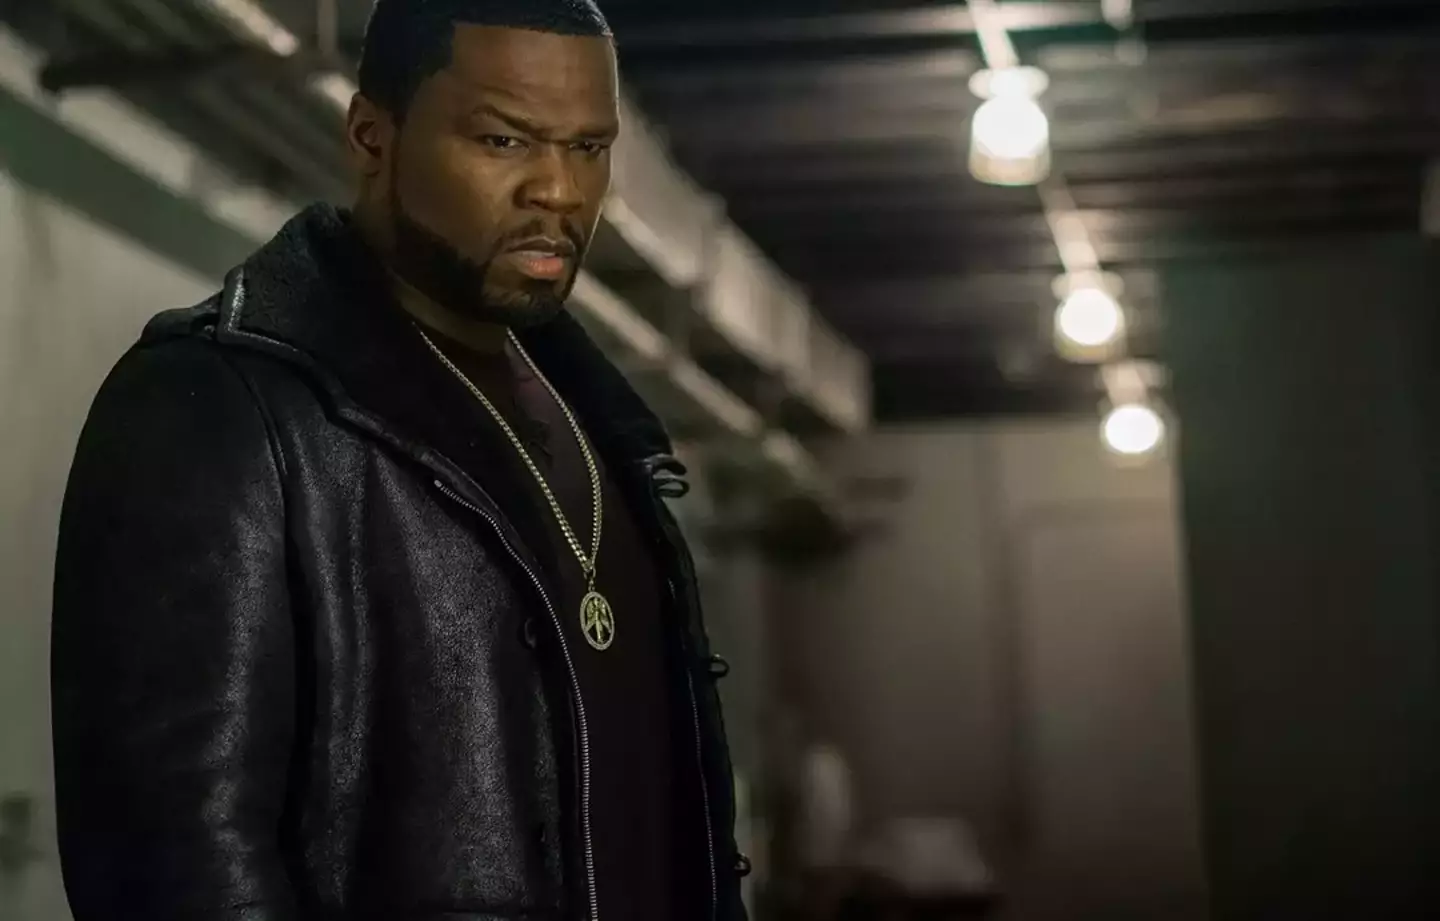 50 Cent was furious about the scene's inclusion.